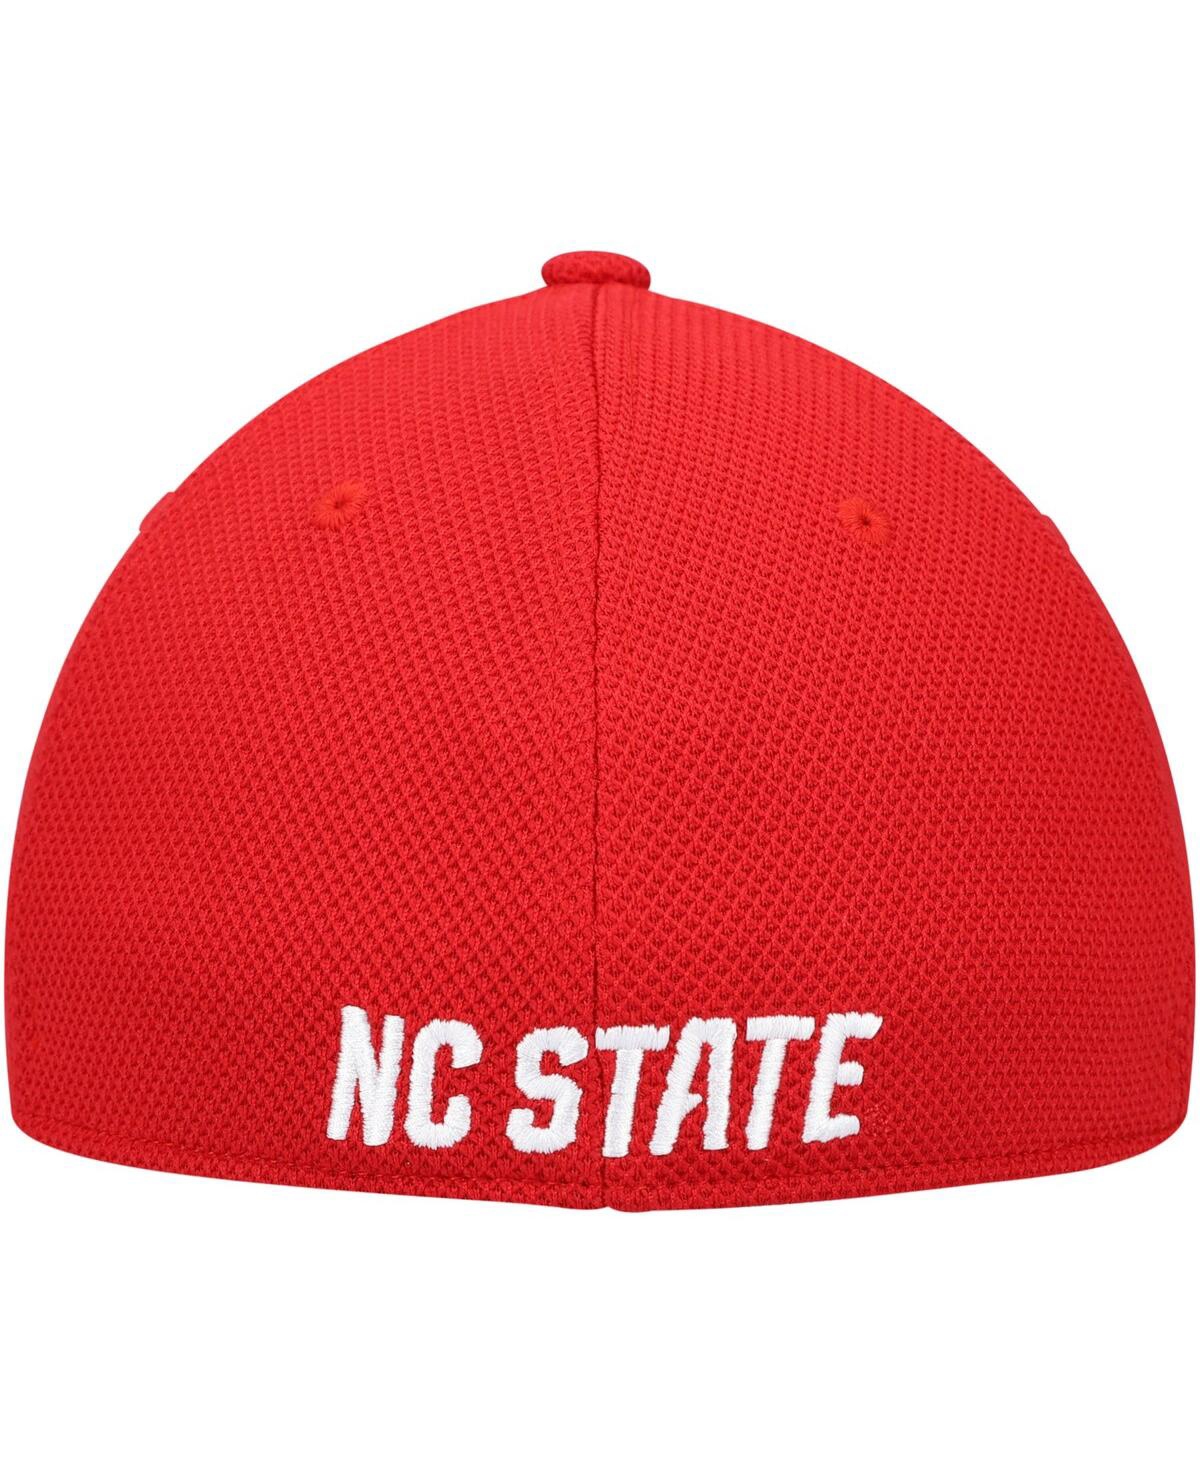 Shop Adidas Originals Men's Adidas Red Nc State Wolfpack On-field Baseball Fitted Hat